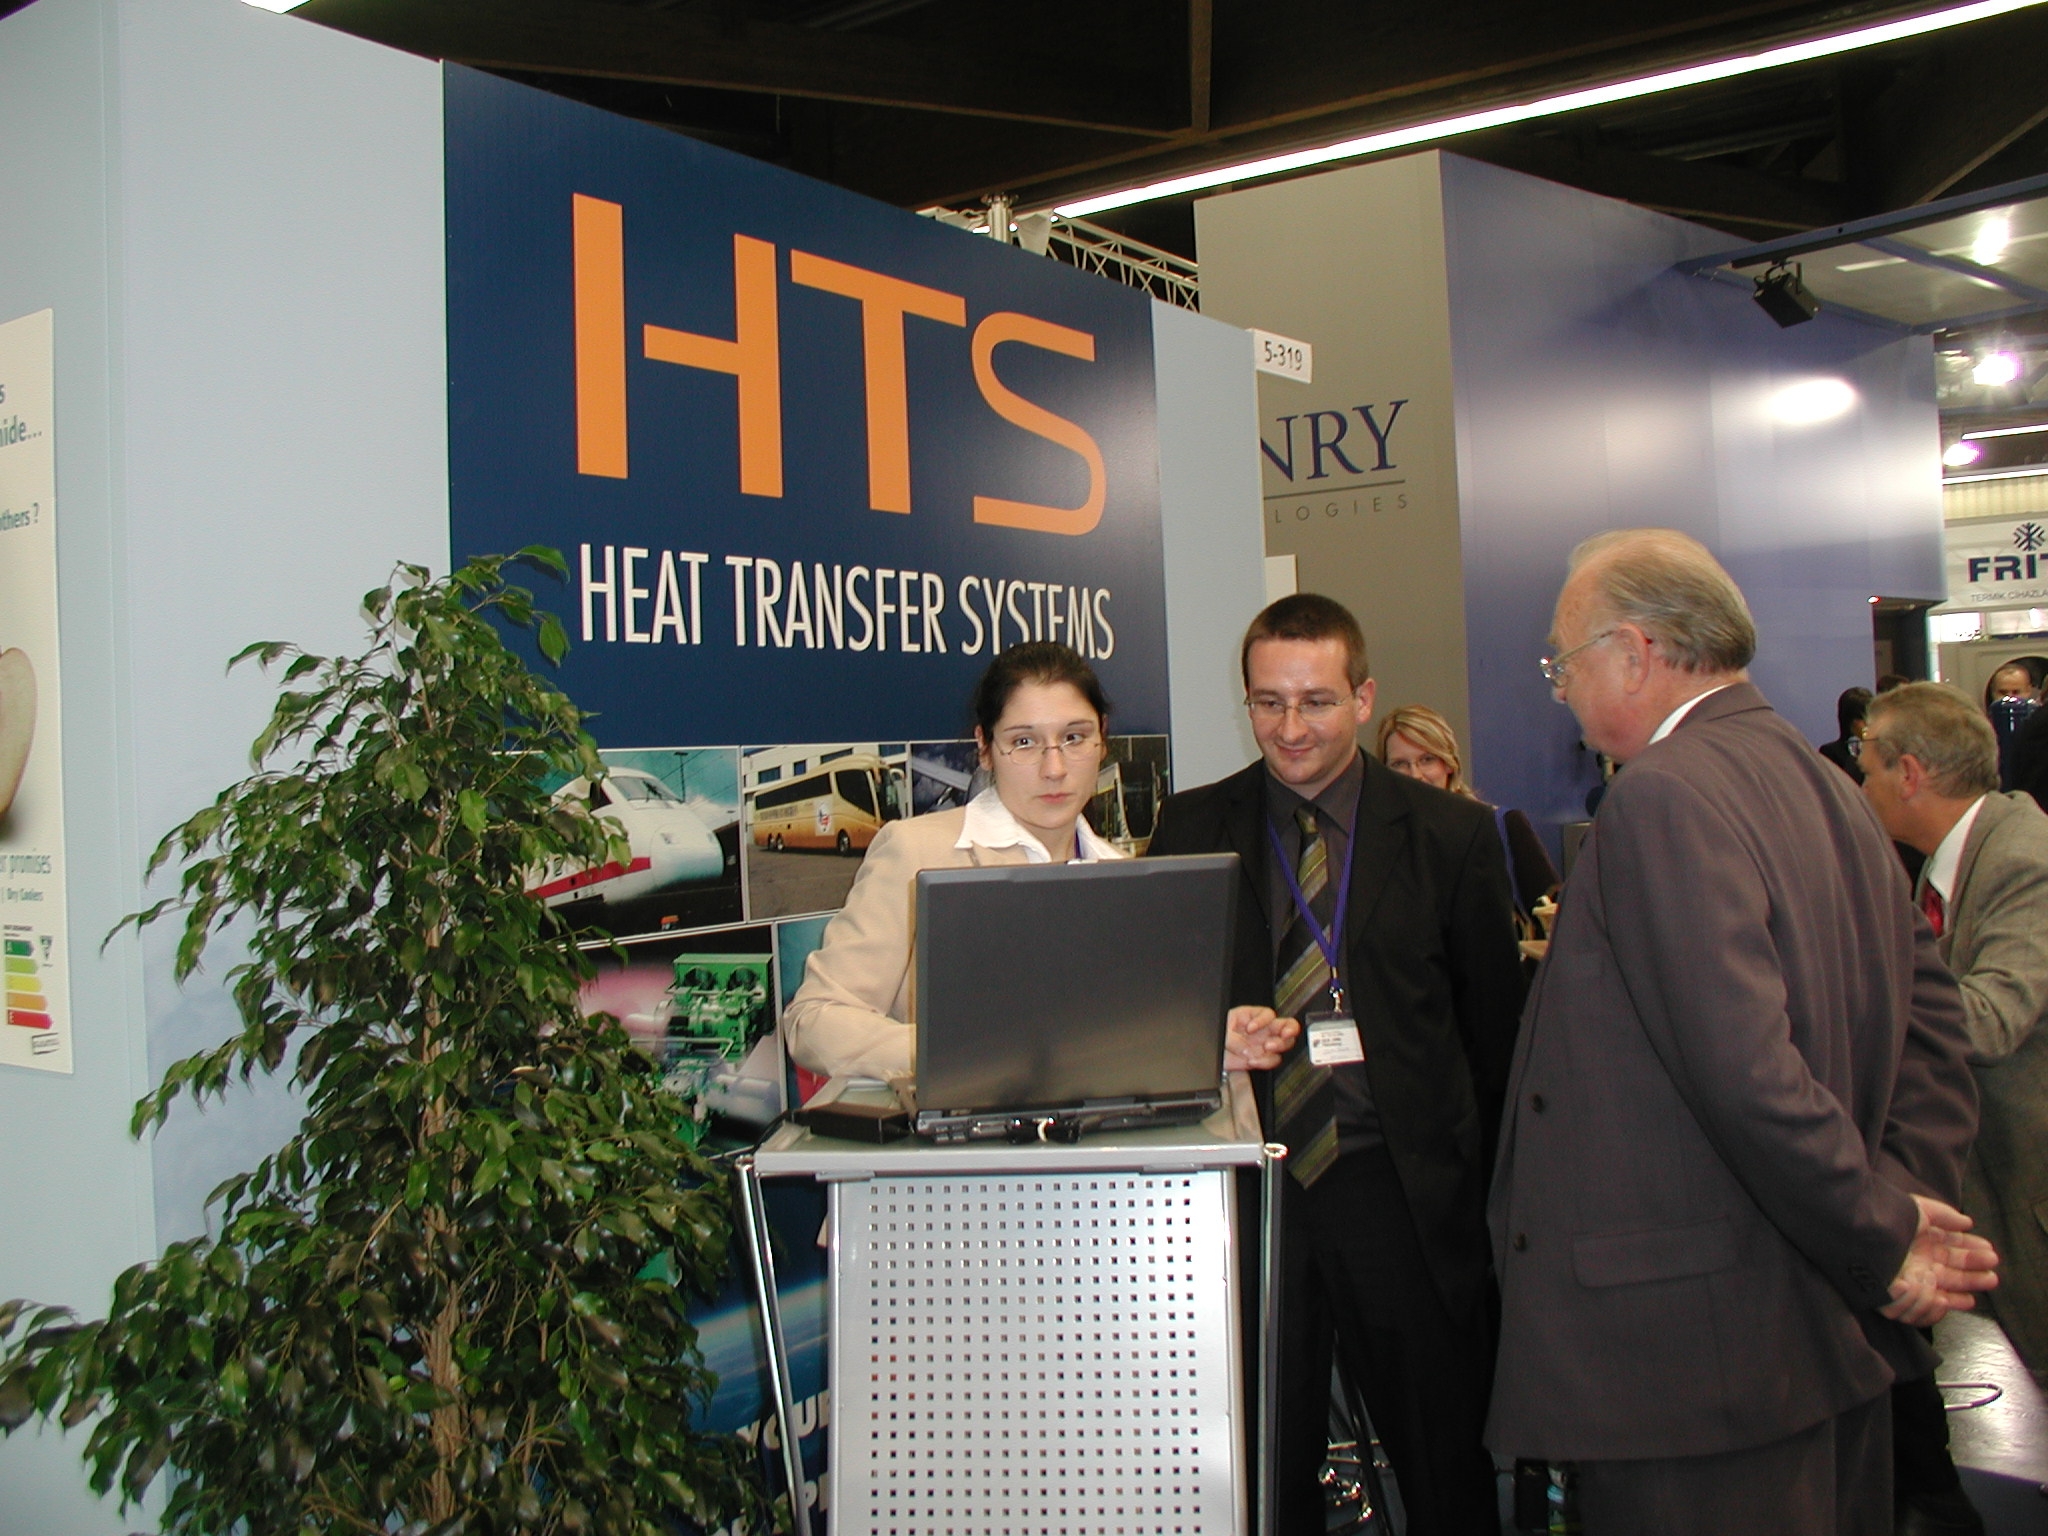 HTS STAND